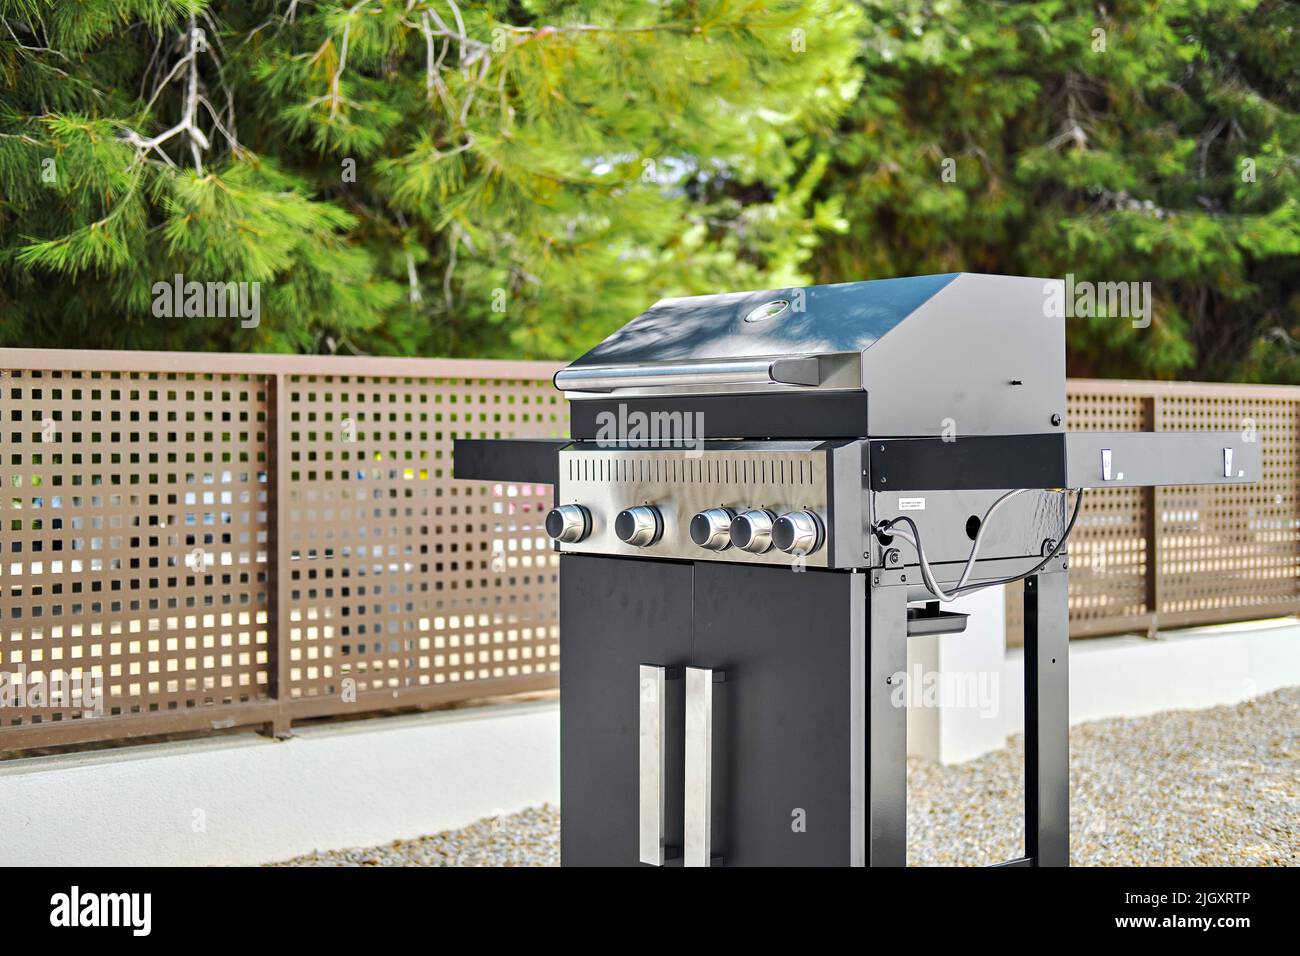 Stainless steel gas grill bbq barbecue in backyard of private residential home. Cooking meat, fish, vegetables in summertime gatherings, no people Stock Photo